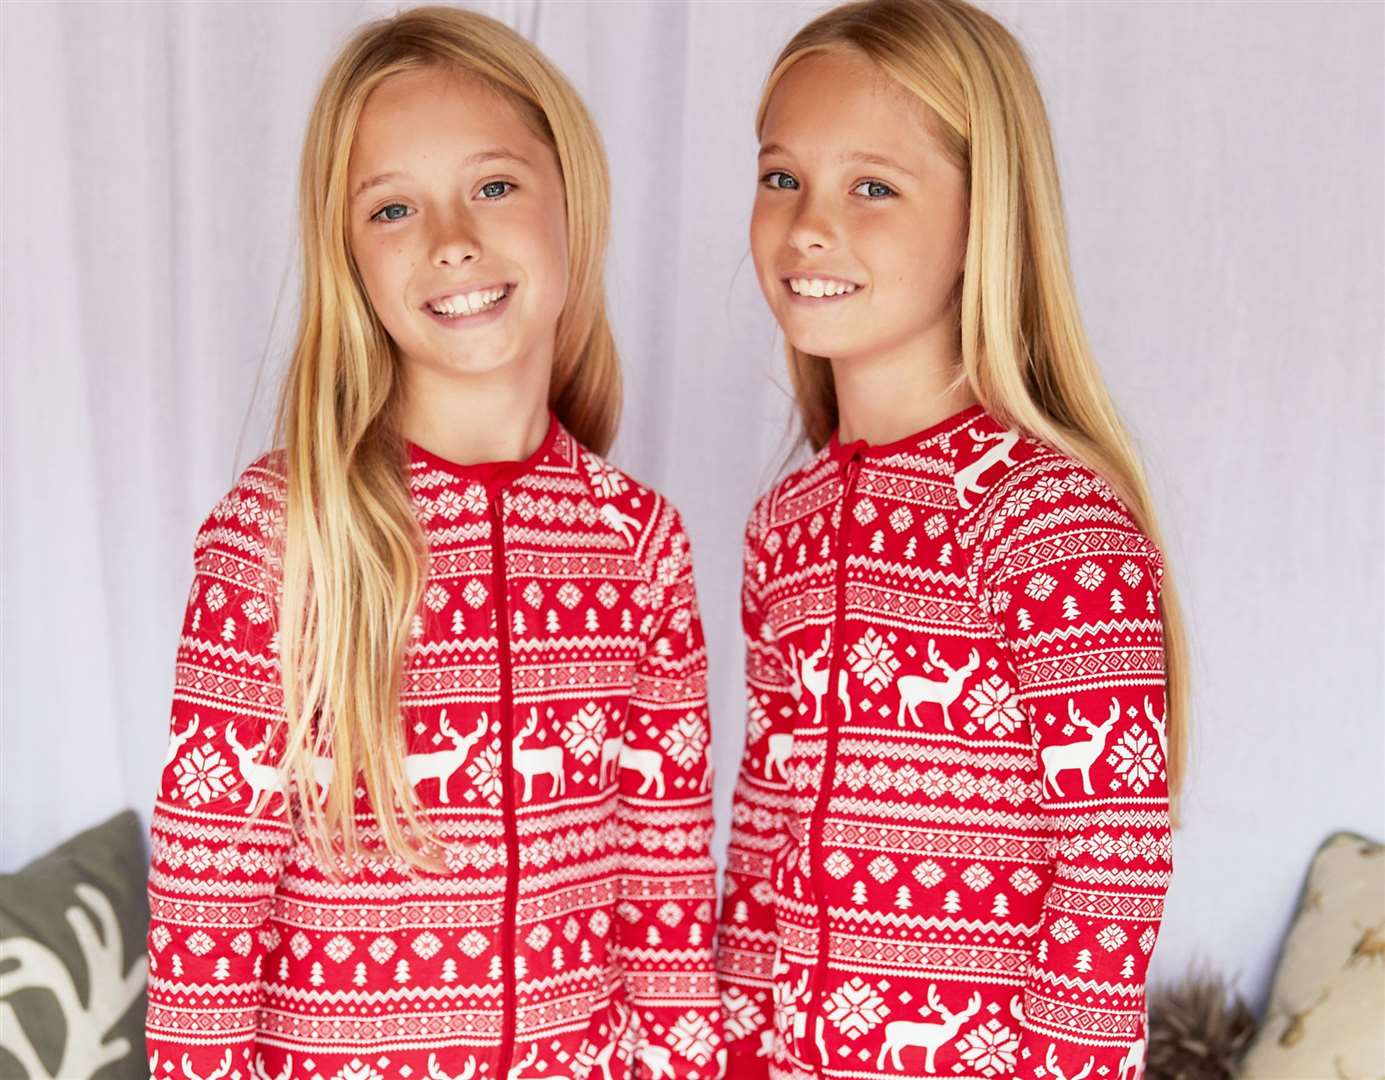 The growth in popularity of matching Christmas pjs also saw them make the list. Image: John Lewis.